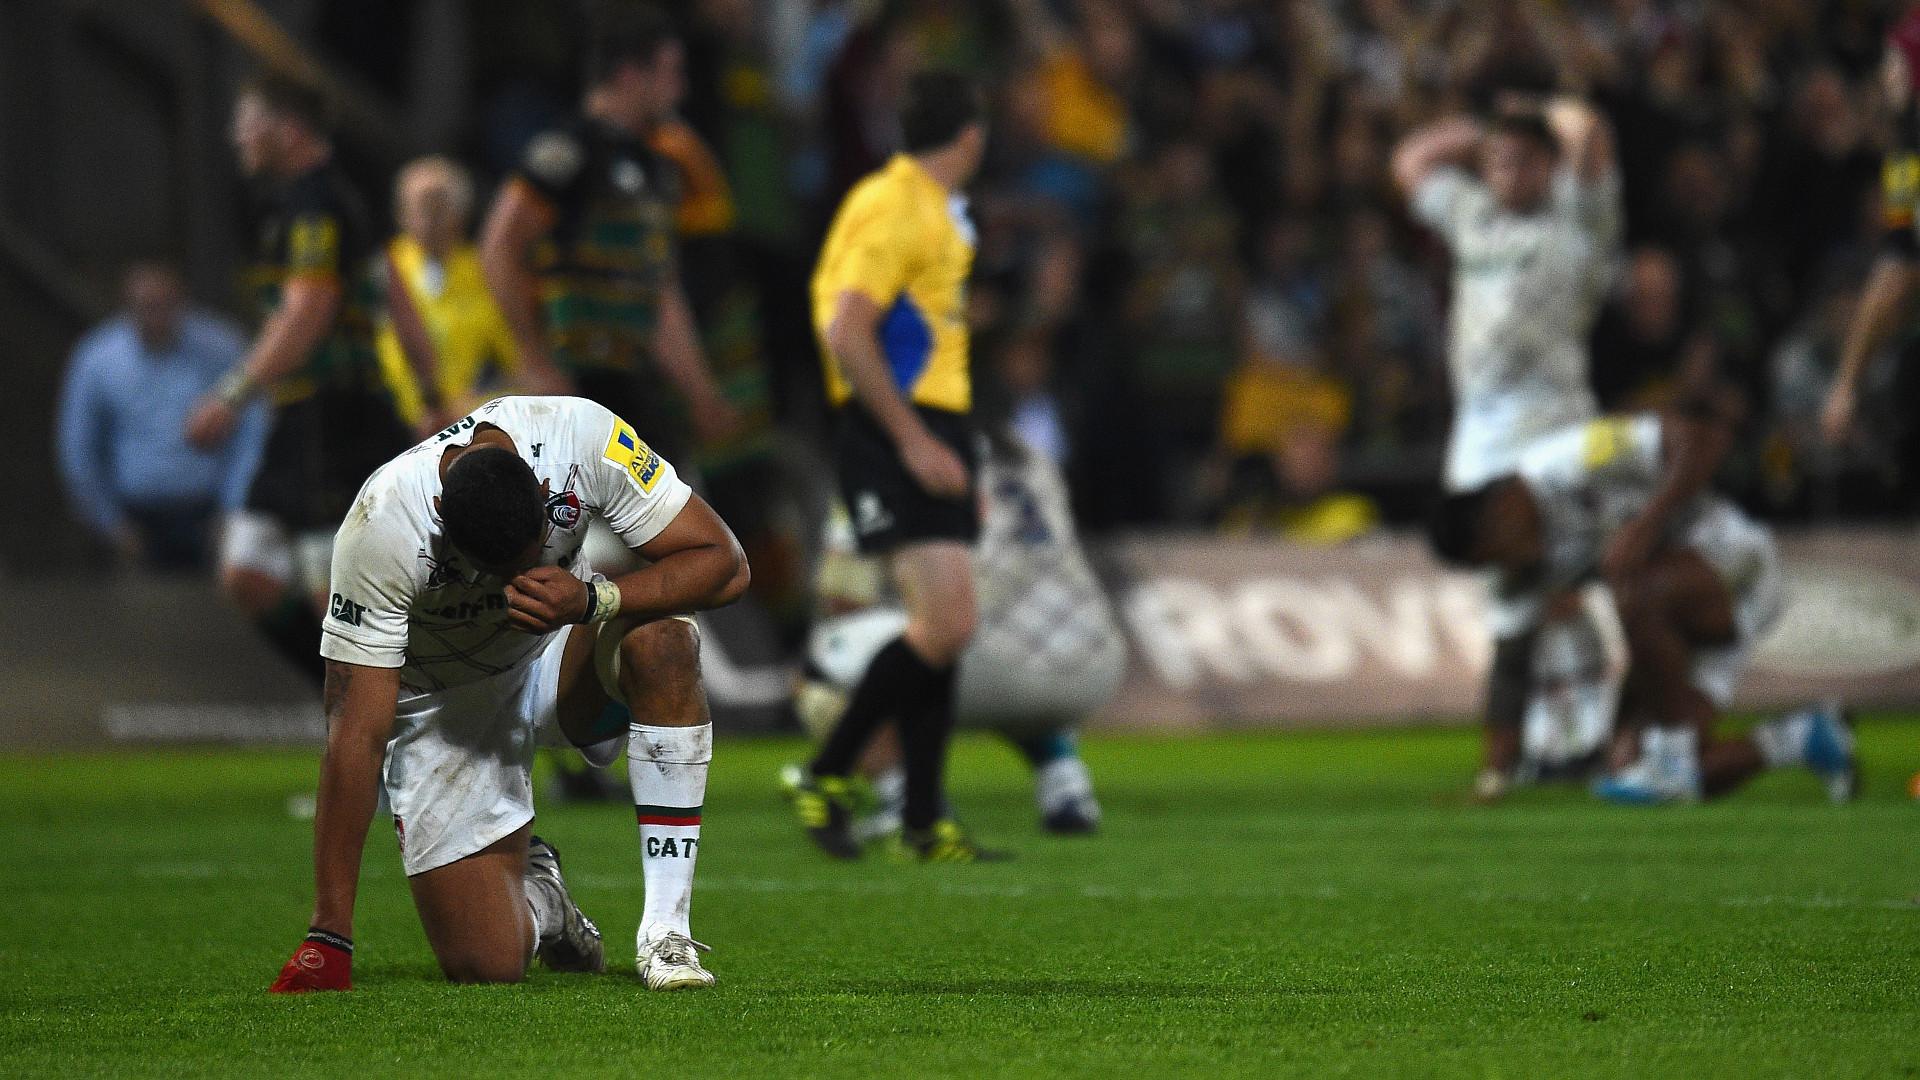 Steve Mafi to return to English rugby, but not with Leicester Tigers